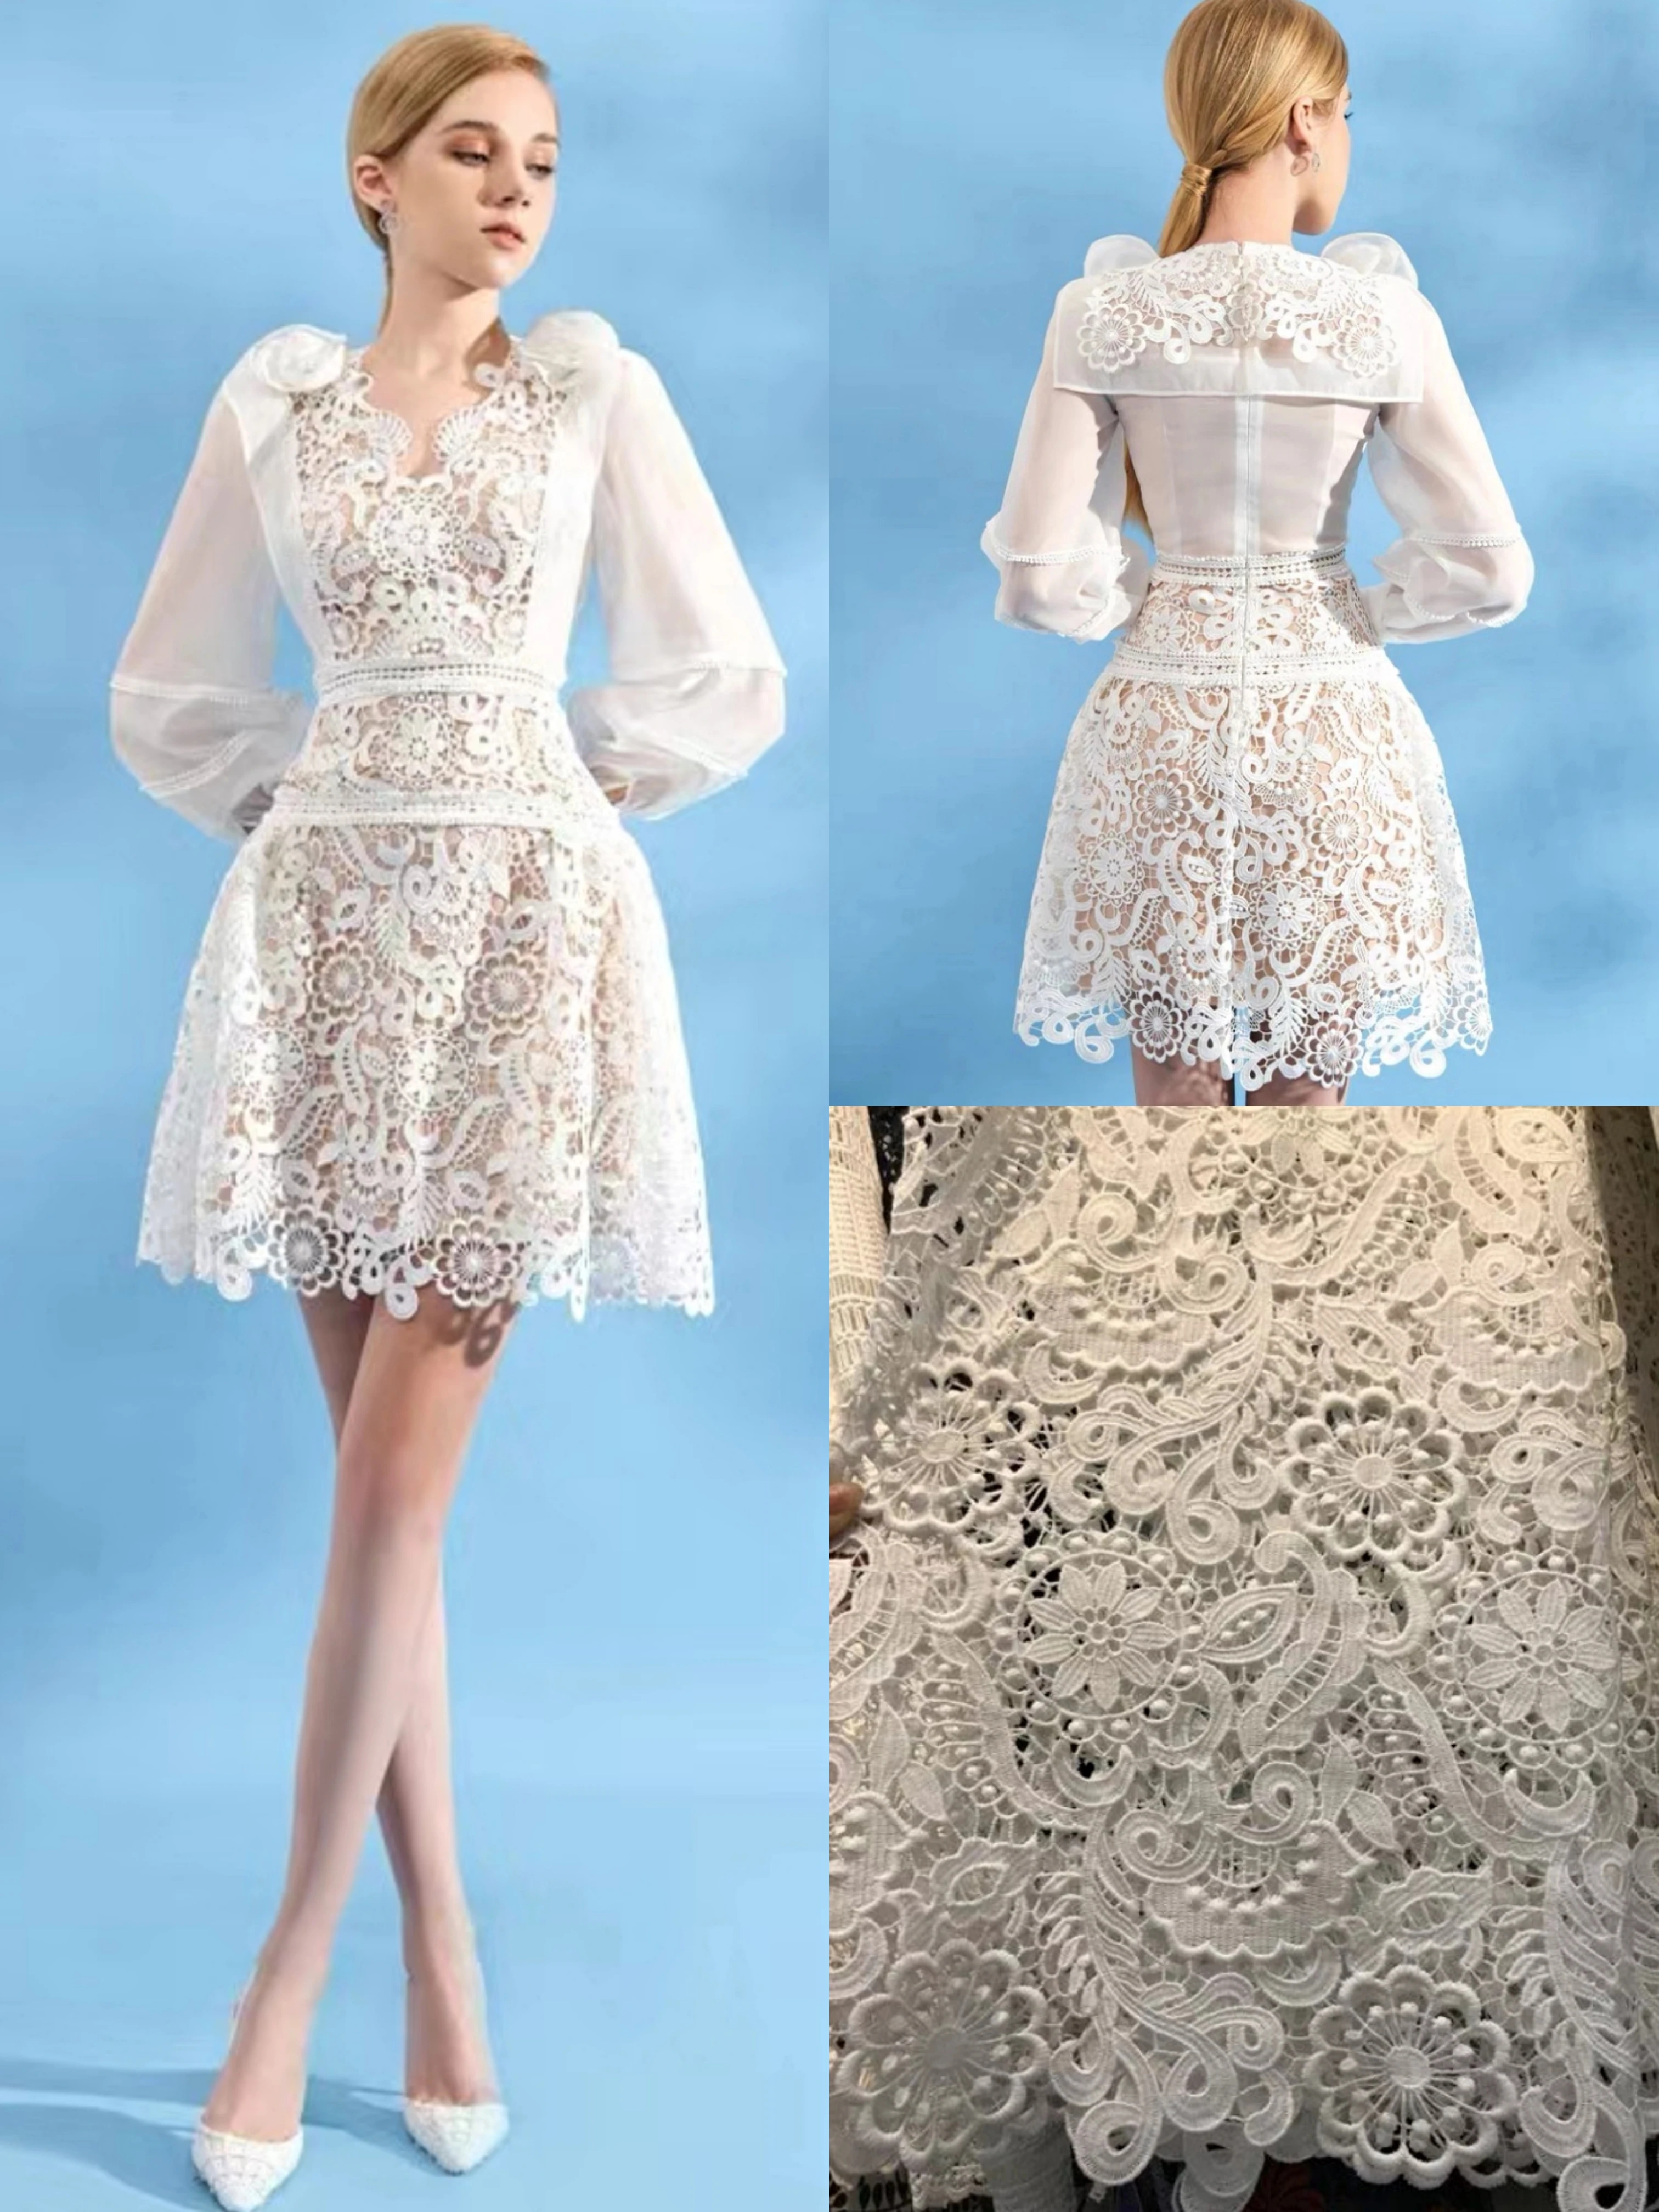 

High Quality White Guipure Cord Lace Europe London Bridal Fabric For Party Dress Sewing